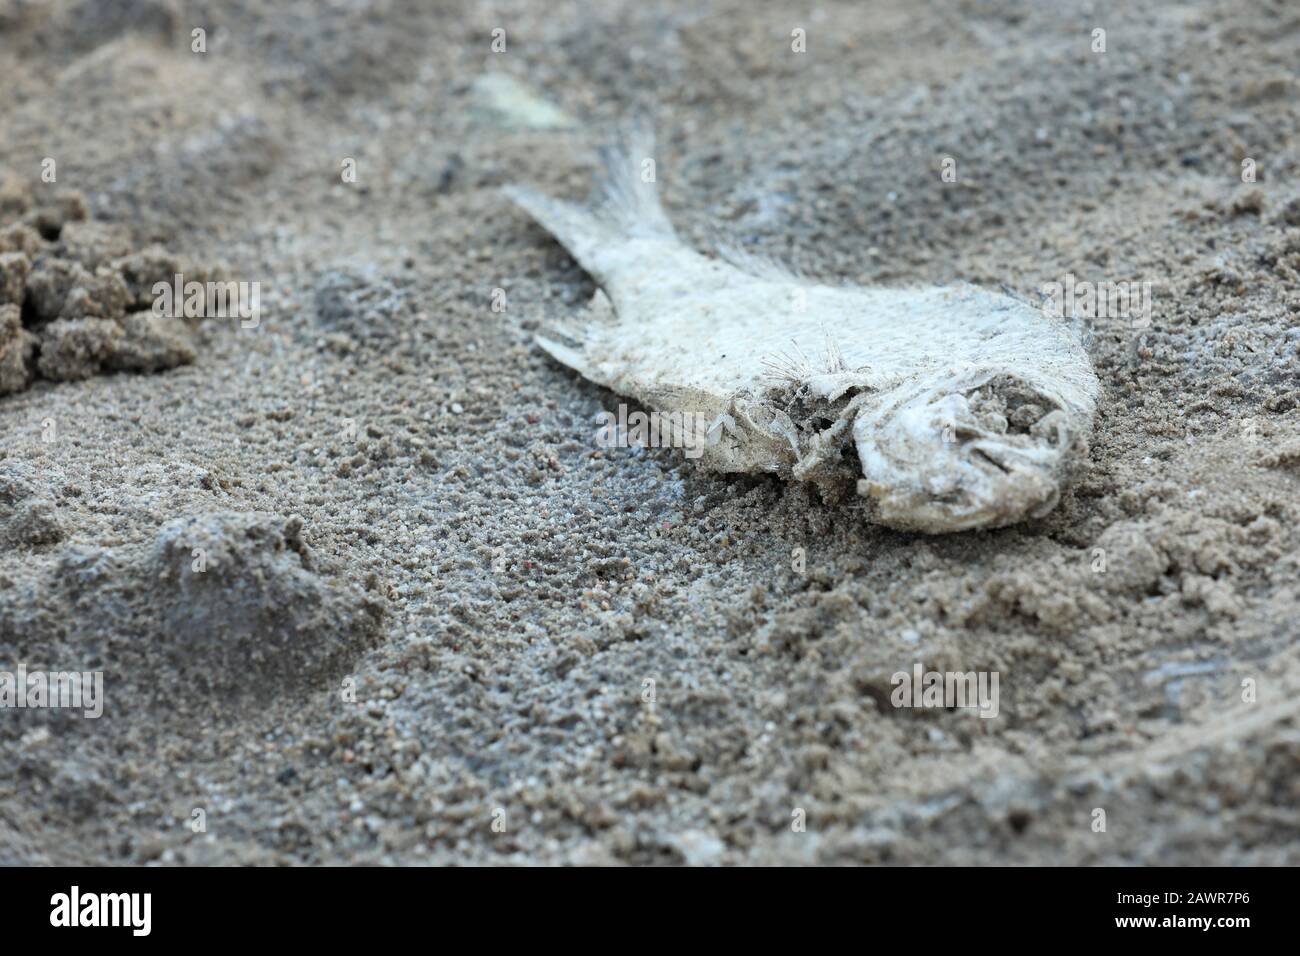 Single dead dry dehydrated silver fish lying on sand. Impact of pollution, drought, climate change, global warming concept. Stock Photo